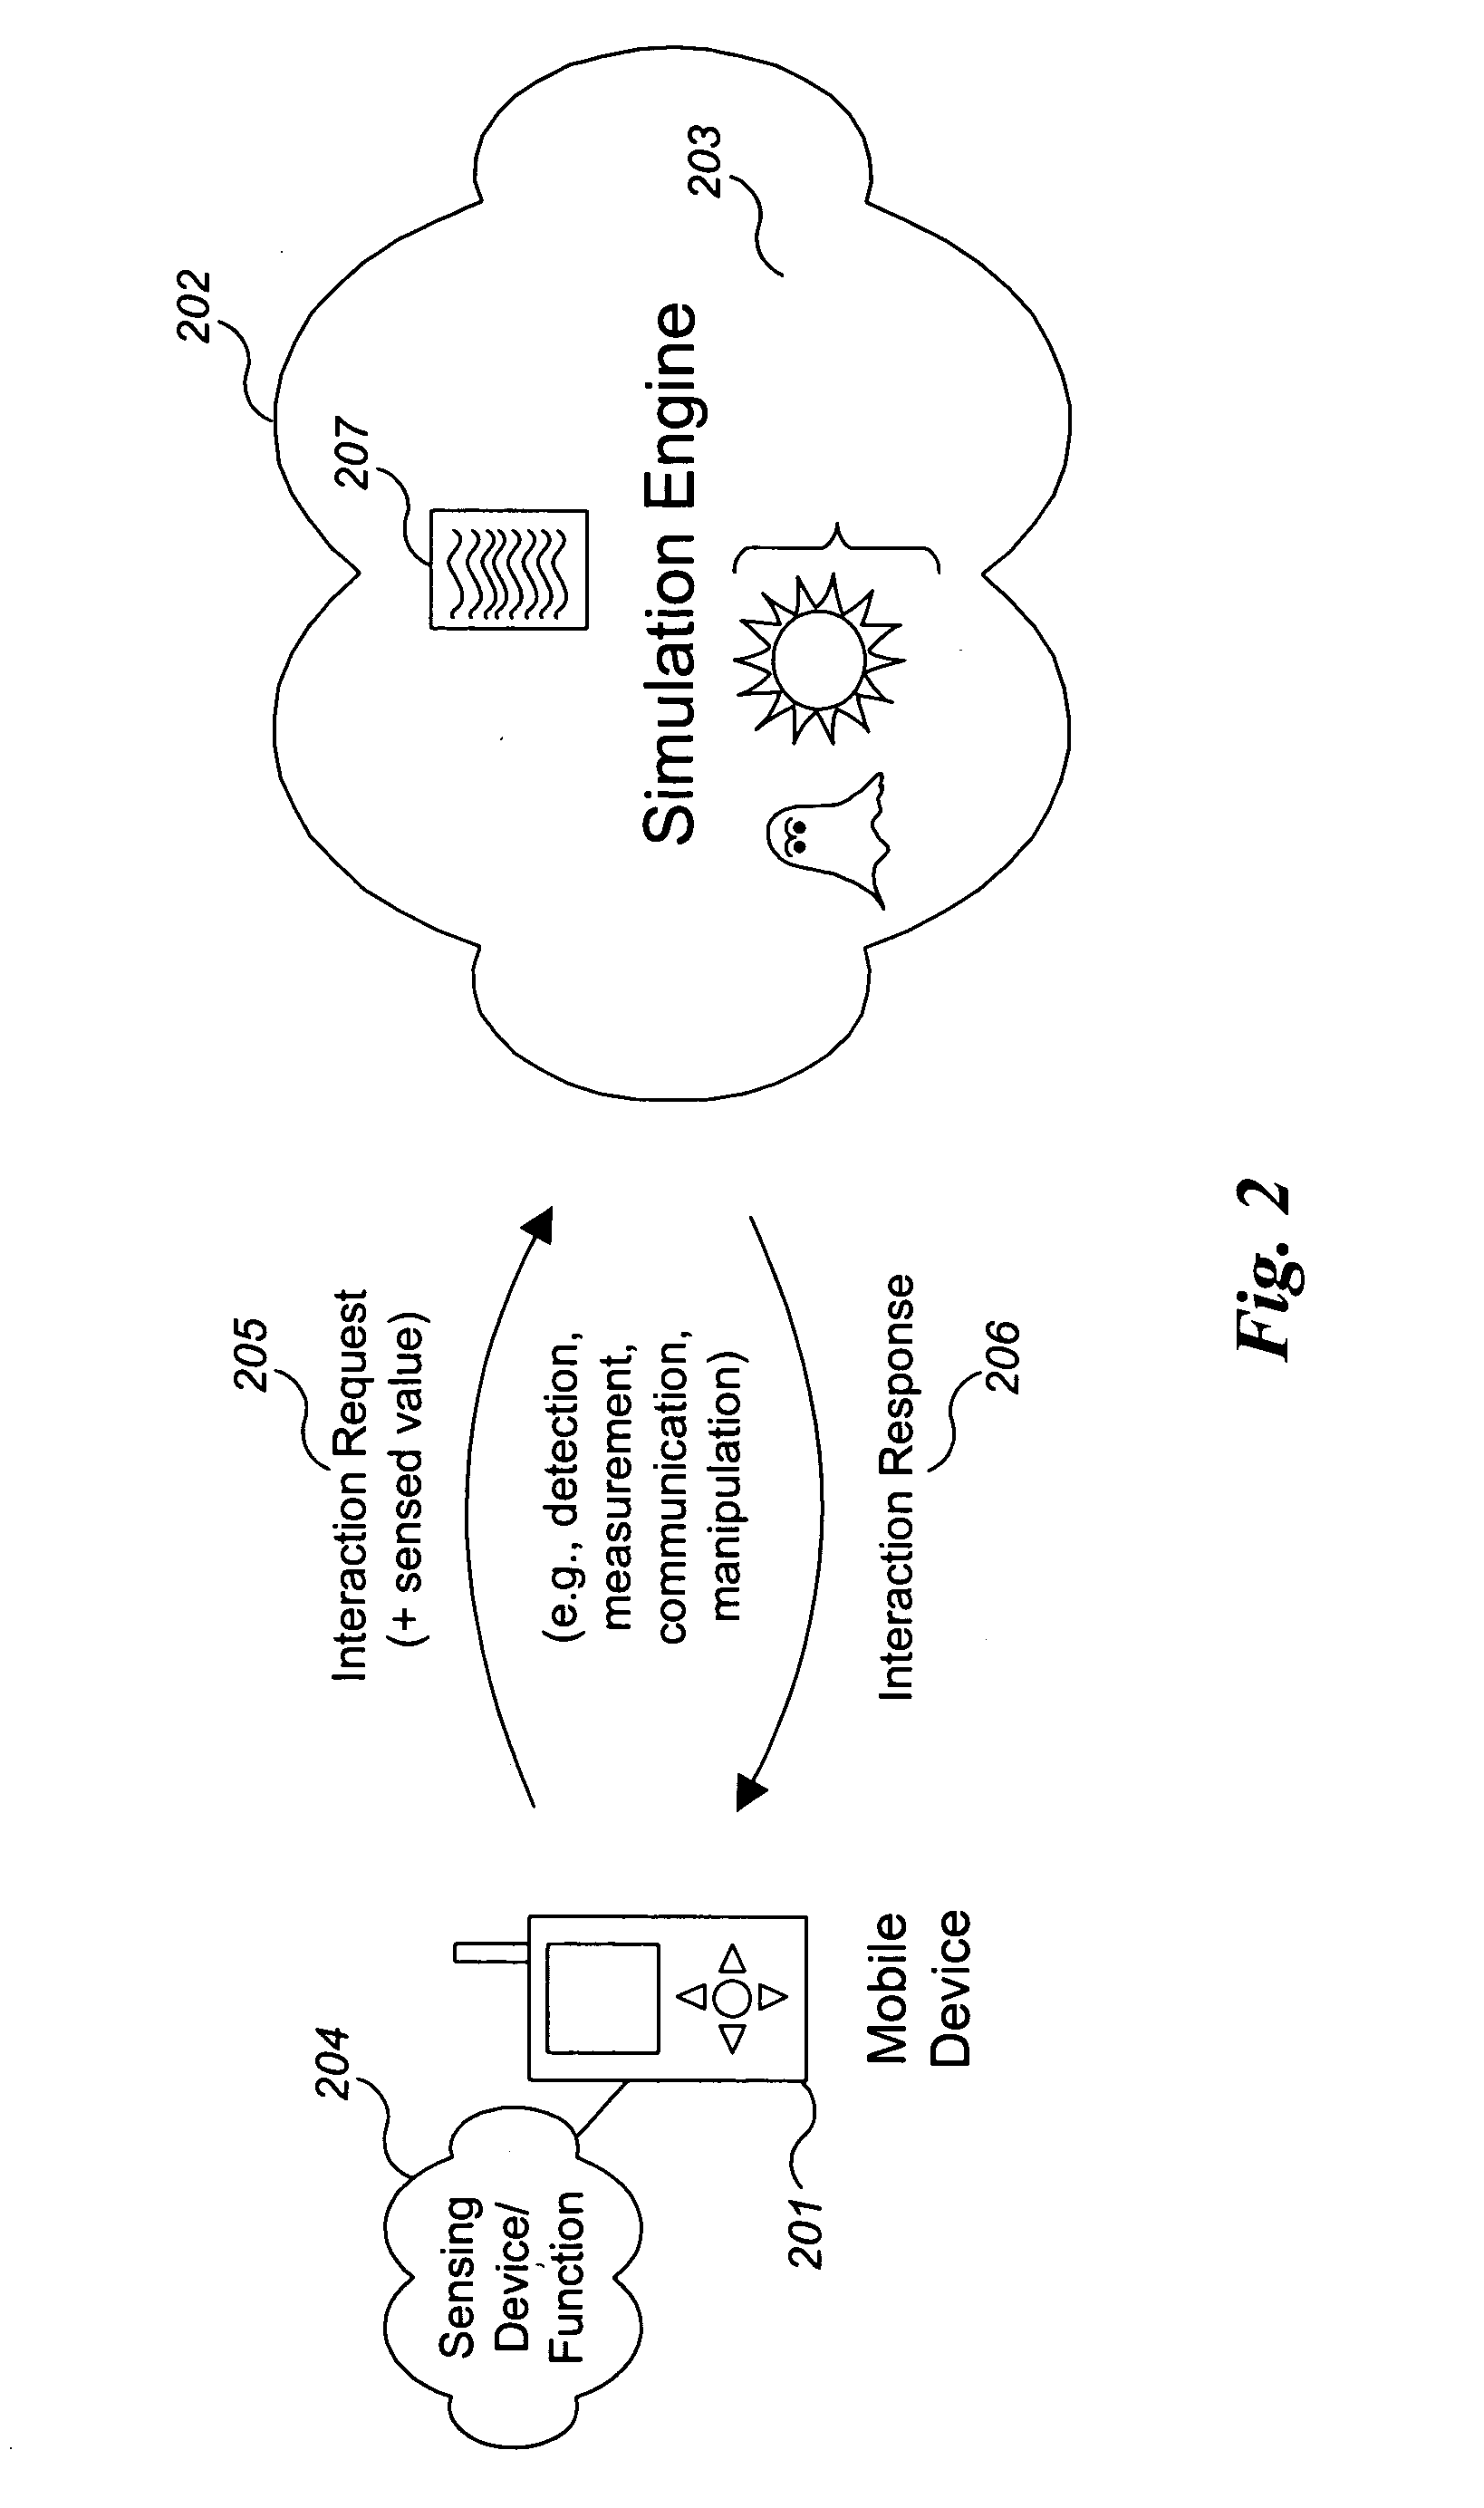 Commerce-enabled environment for interacting with simulated phenomena